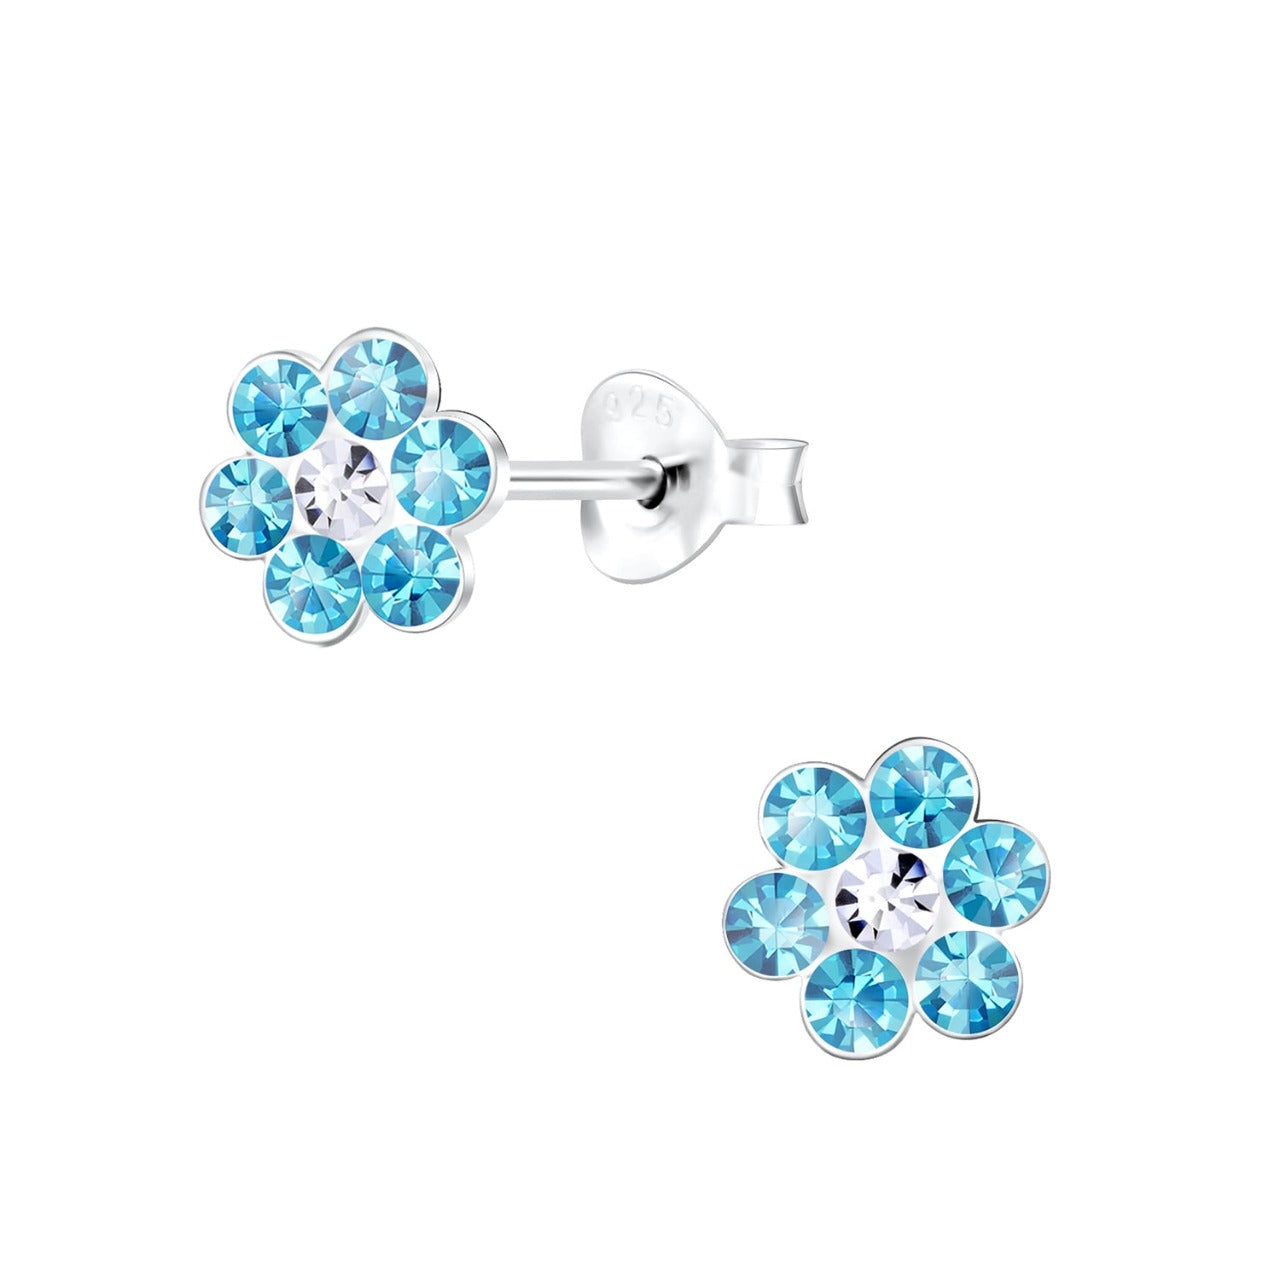 Kilkenny Silver Kids Crystal Flower Stud Earrings - Blue  Sterling silver crystal stud earrings with many colours to choose from.  These stunning earrings are a great finishing touch for your girl's daily fashionable outfit.